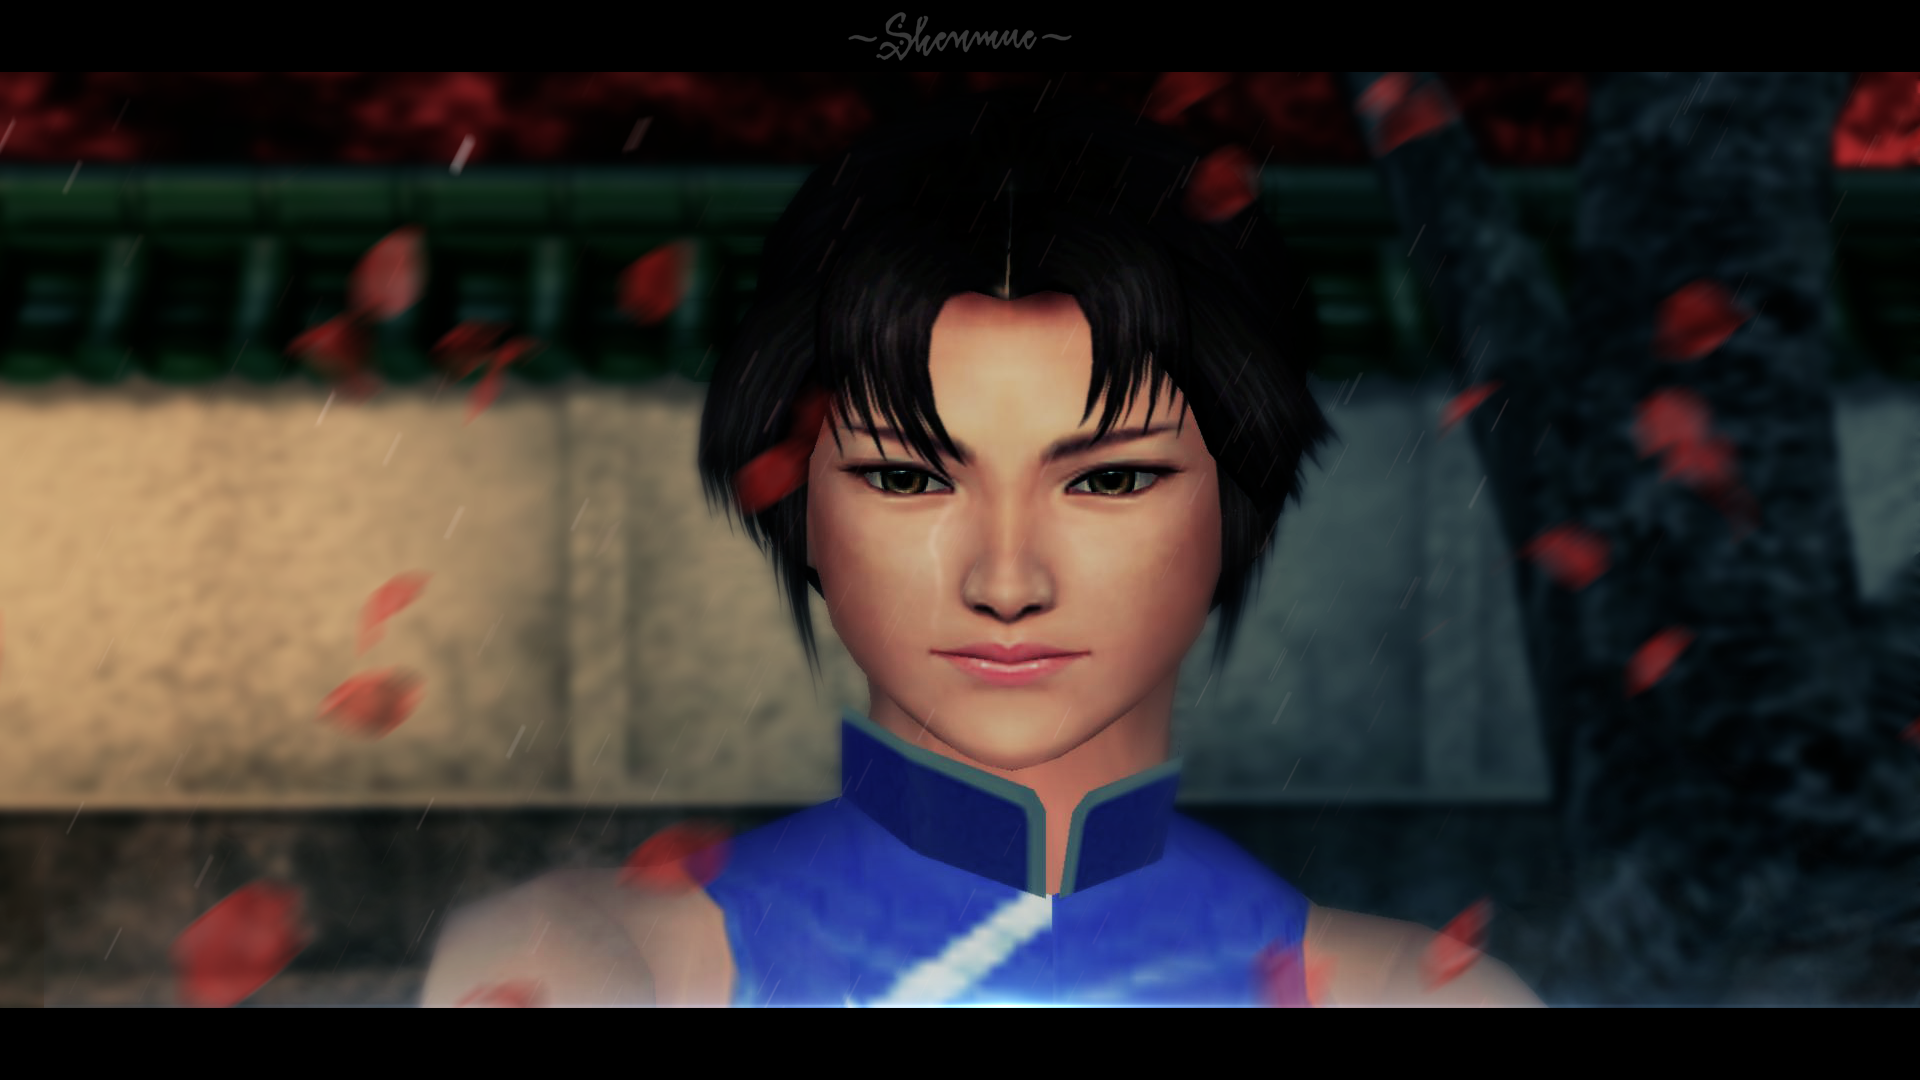 General 1920x1080 shenmue video games video game girls black hair women Asian video game characters